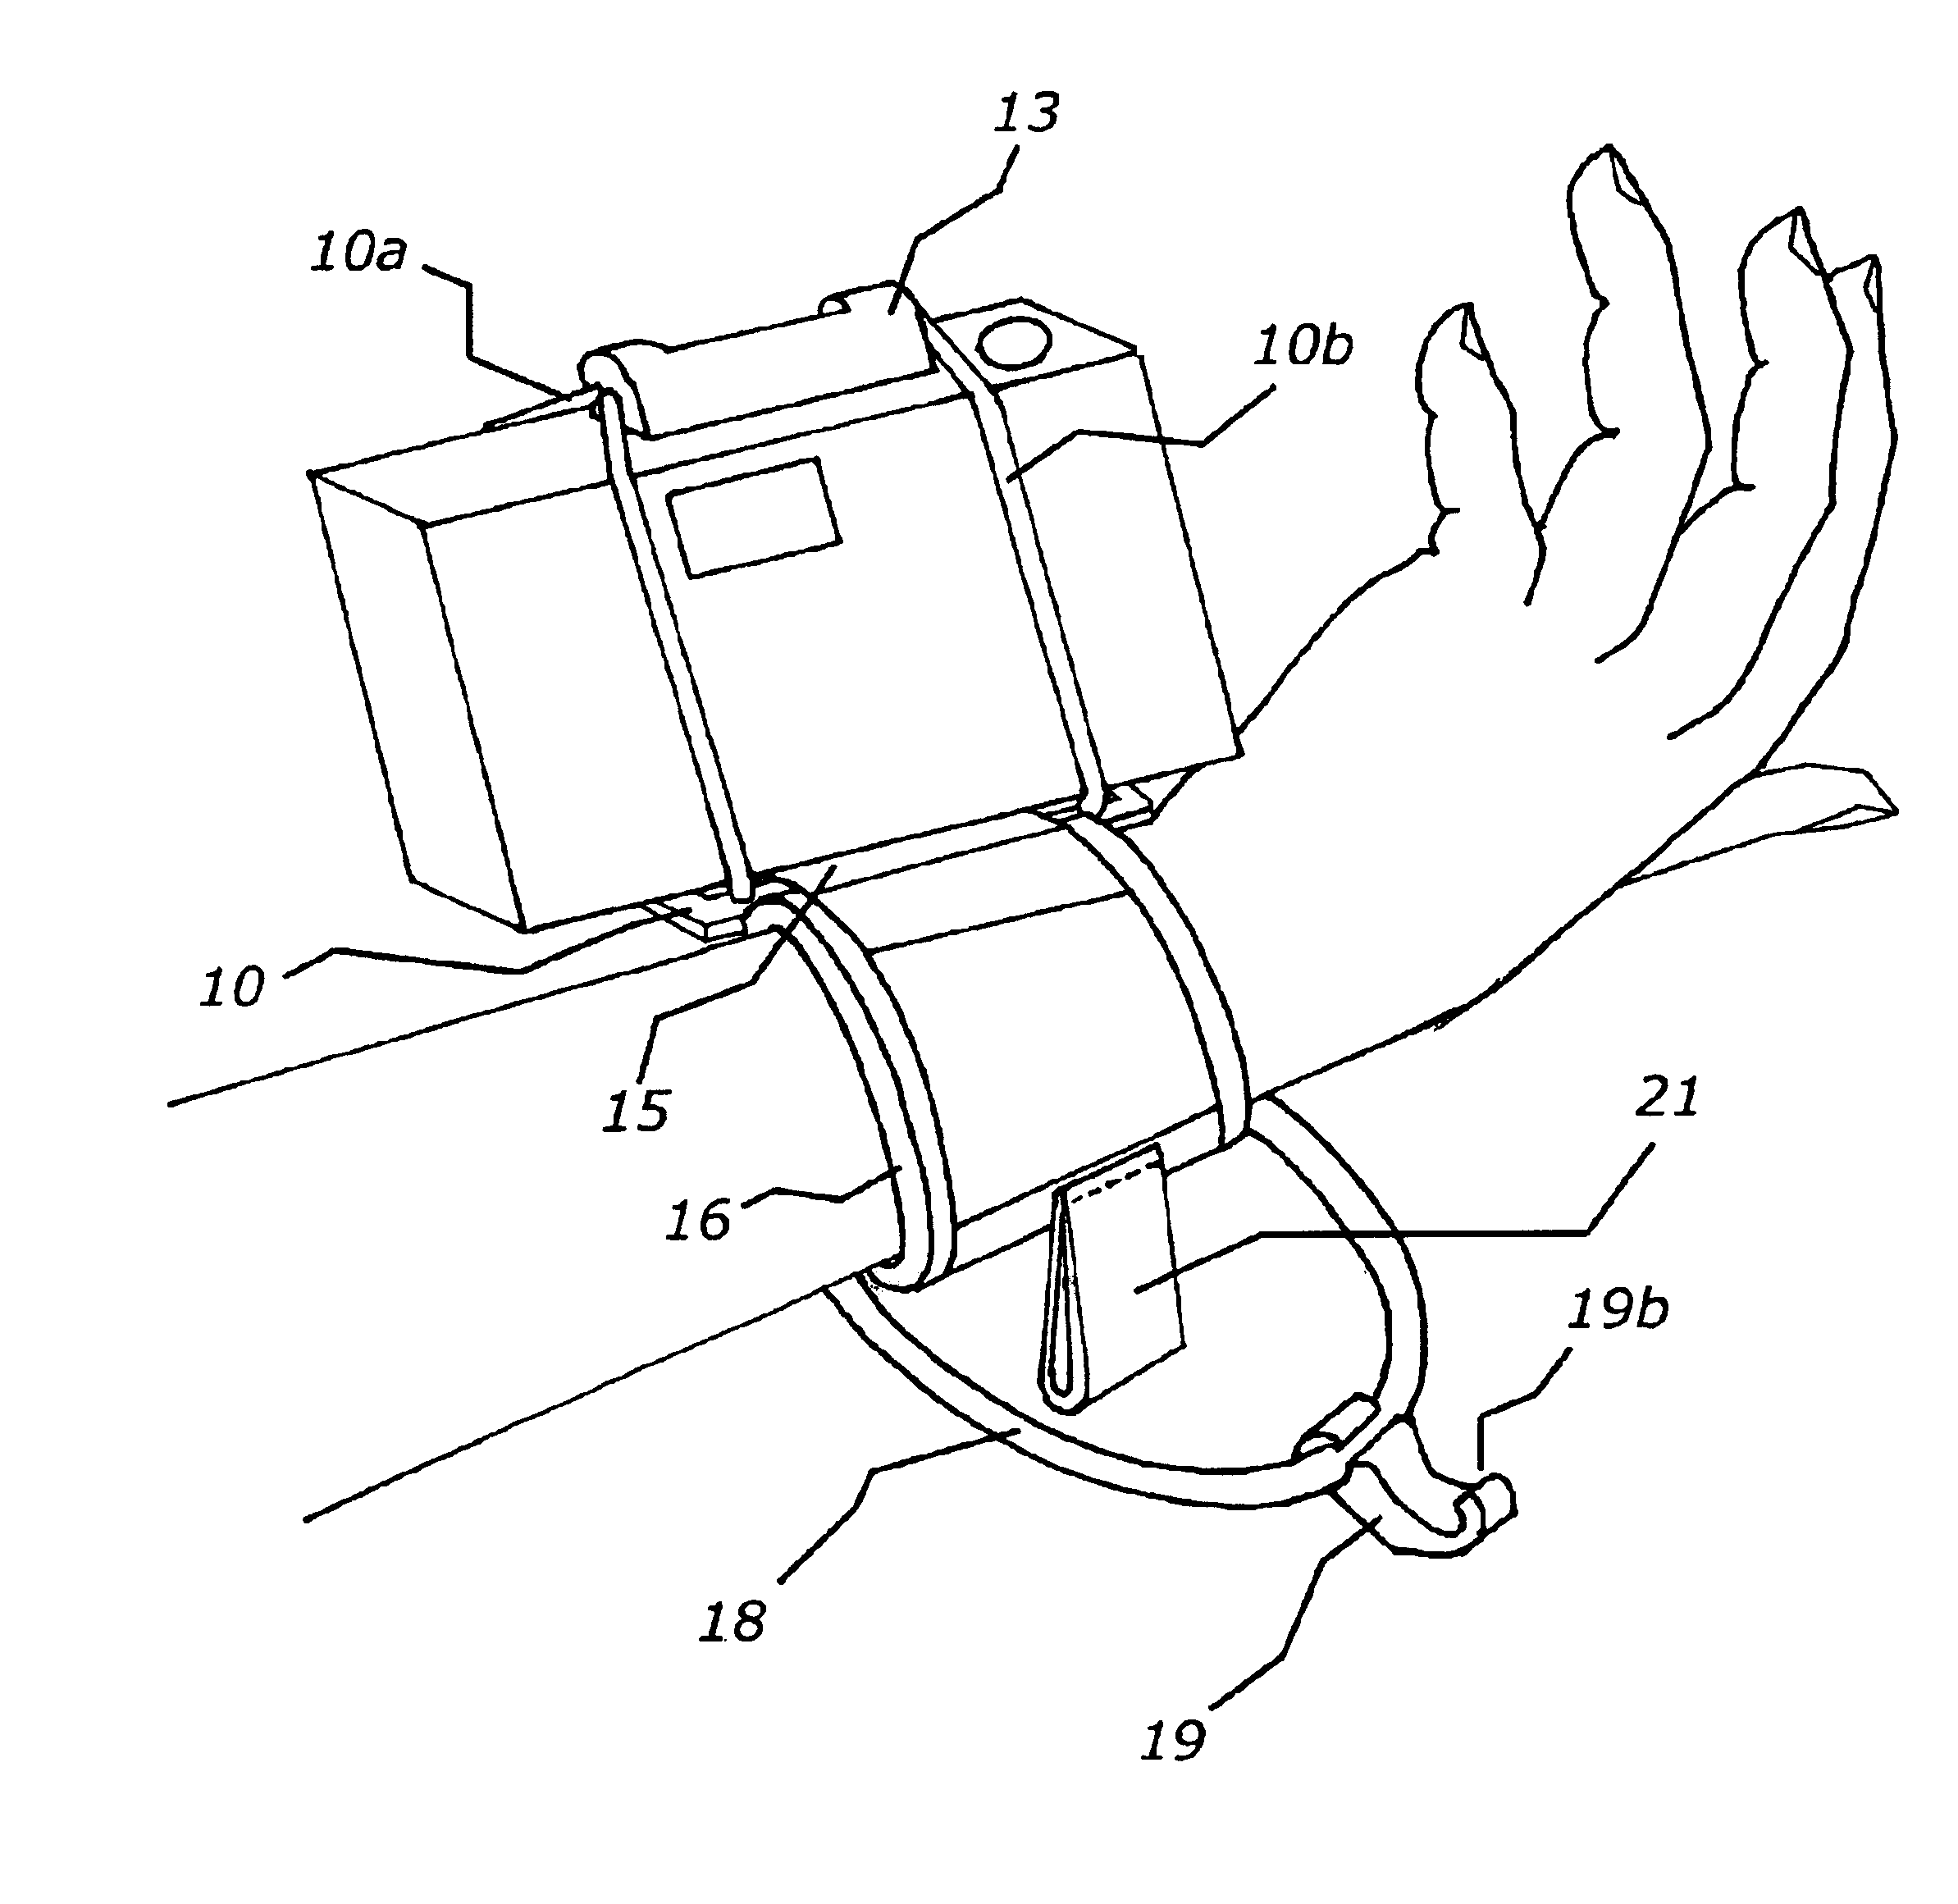 Harness system for attaching camera to user